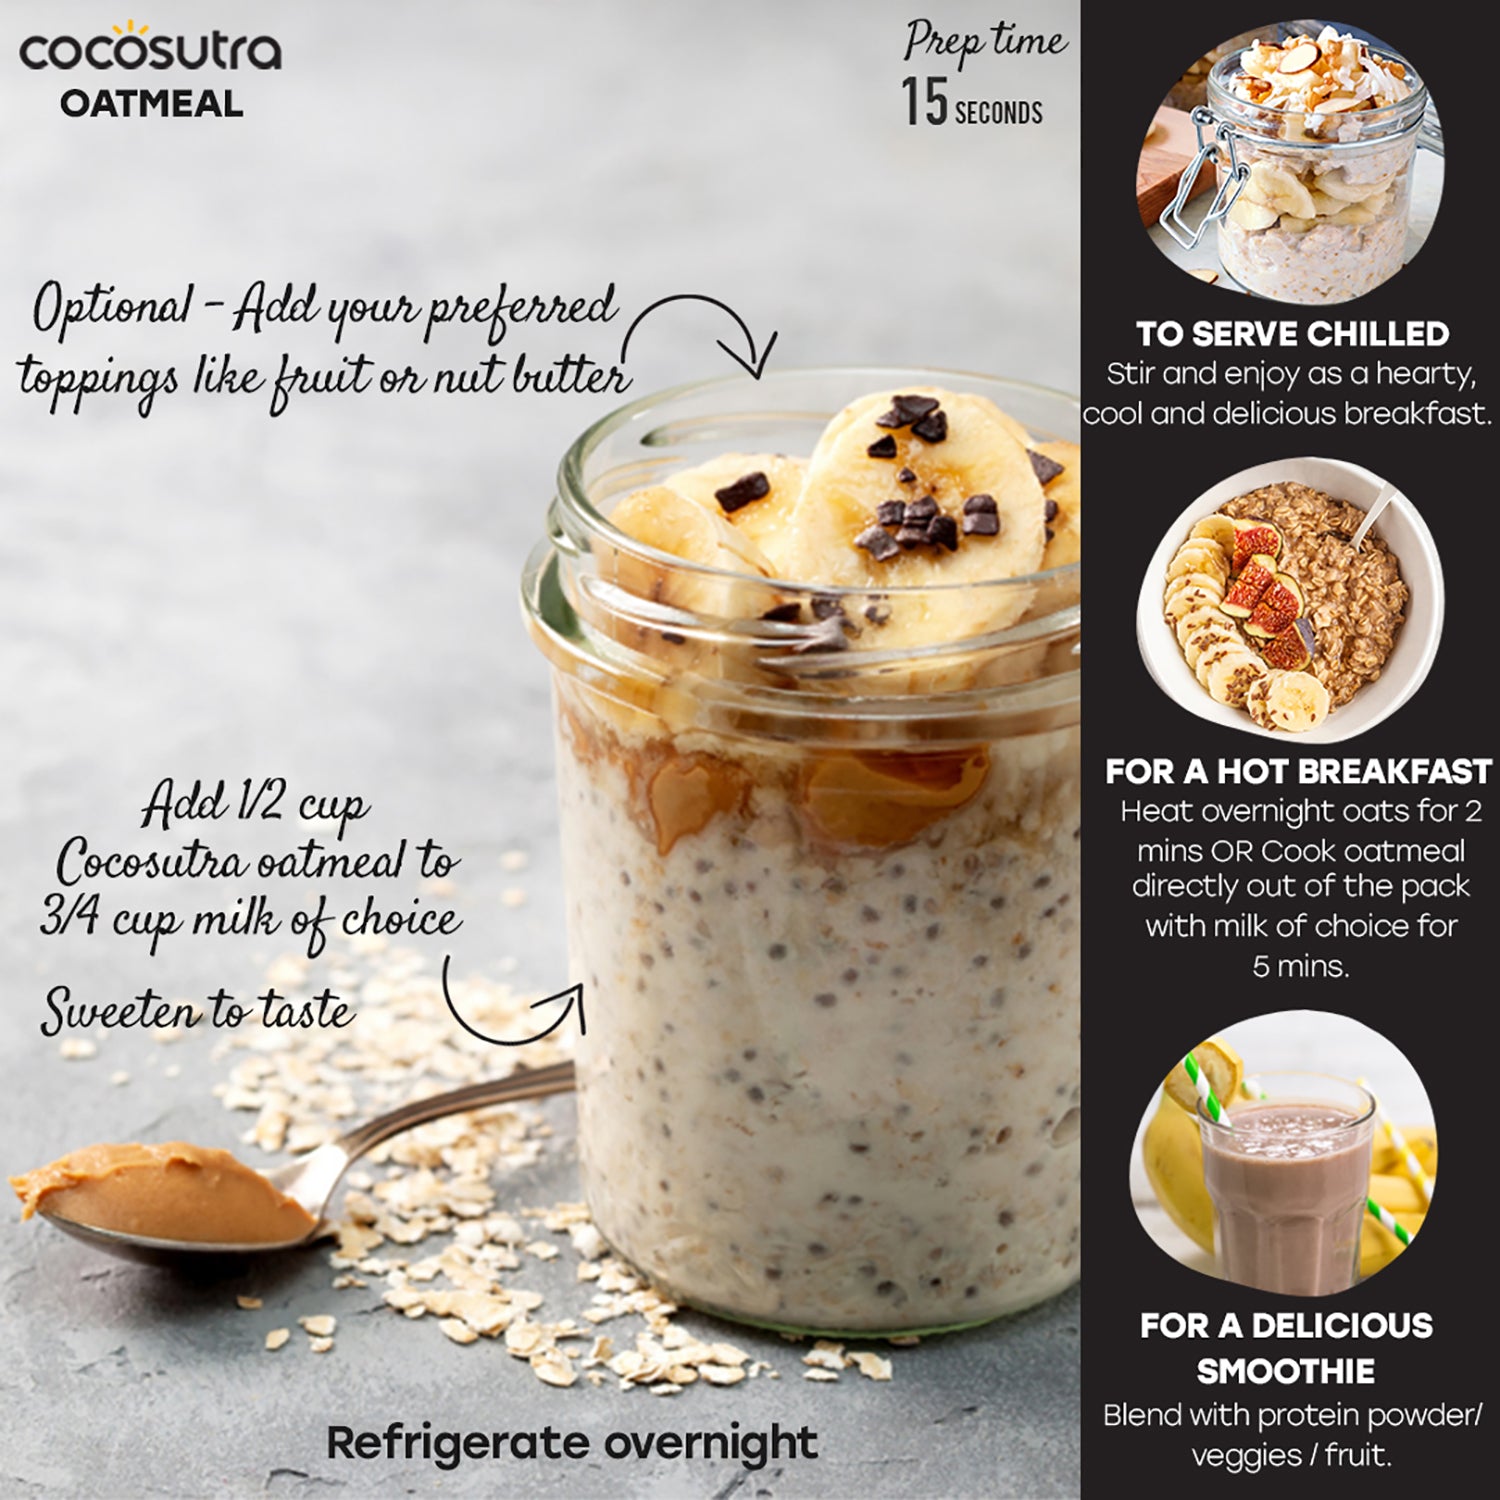 Oatmeal Recipe Instructions - Cocosutra